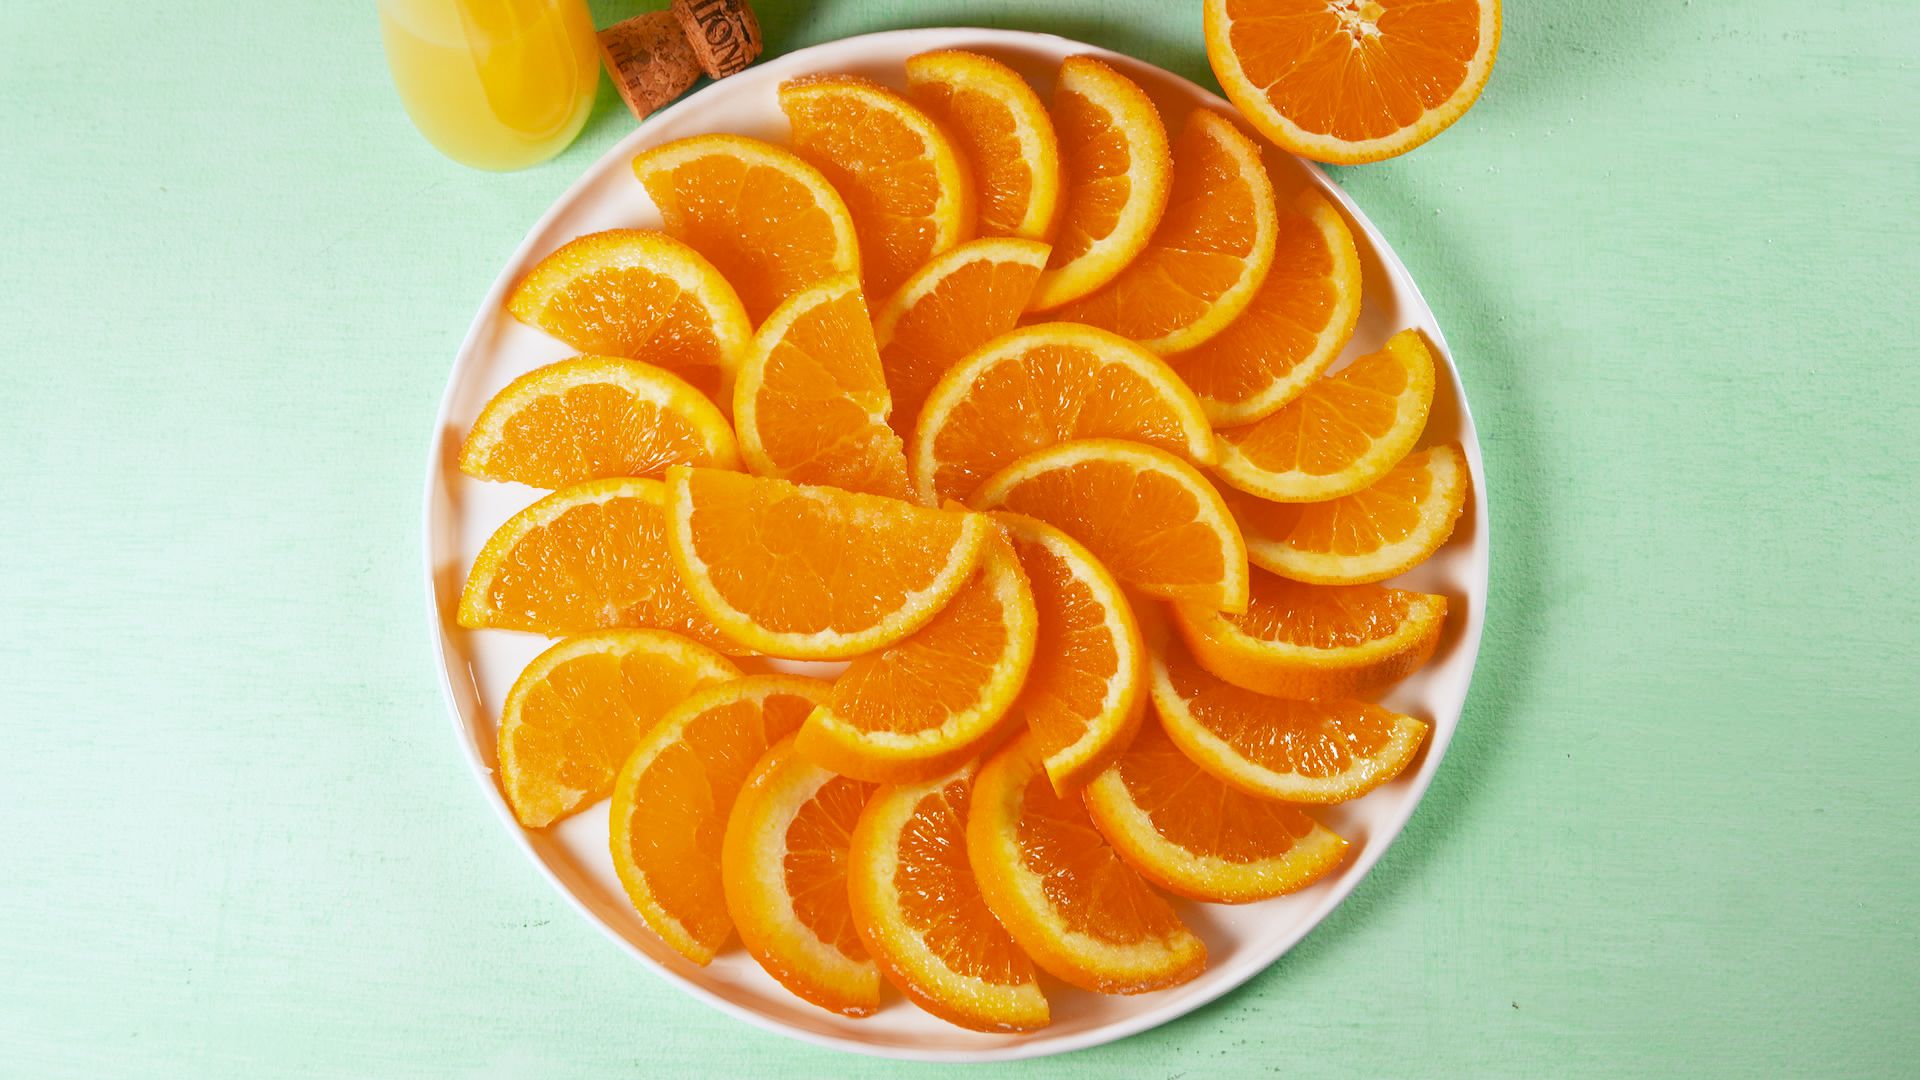 Best Mimosa Oranges Recipe - How To Make Mimosa Oranges